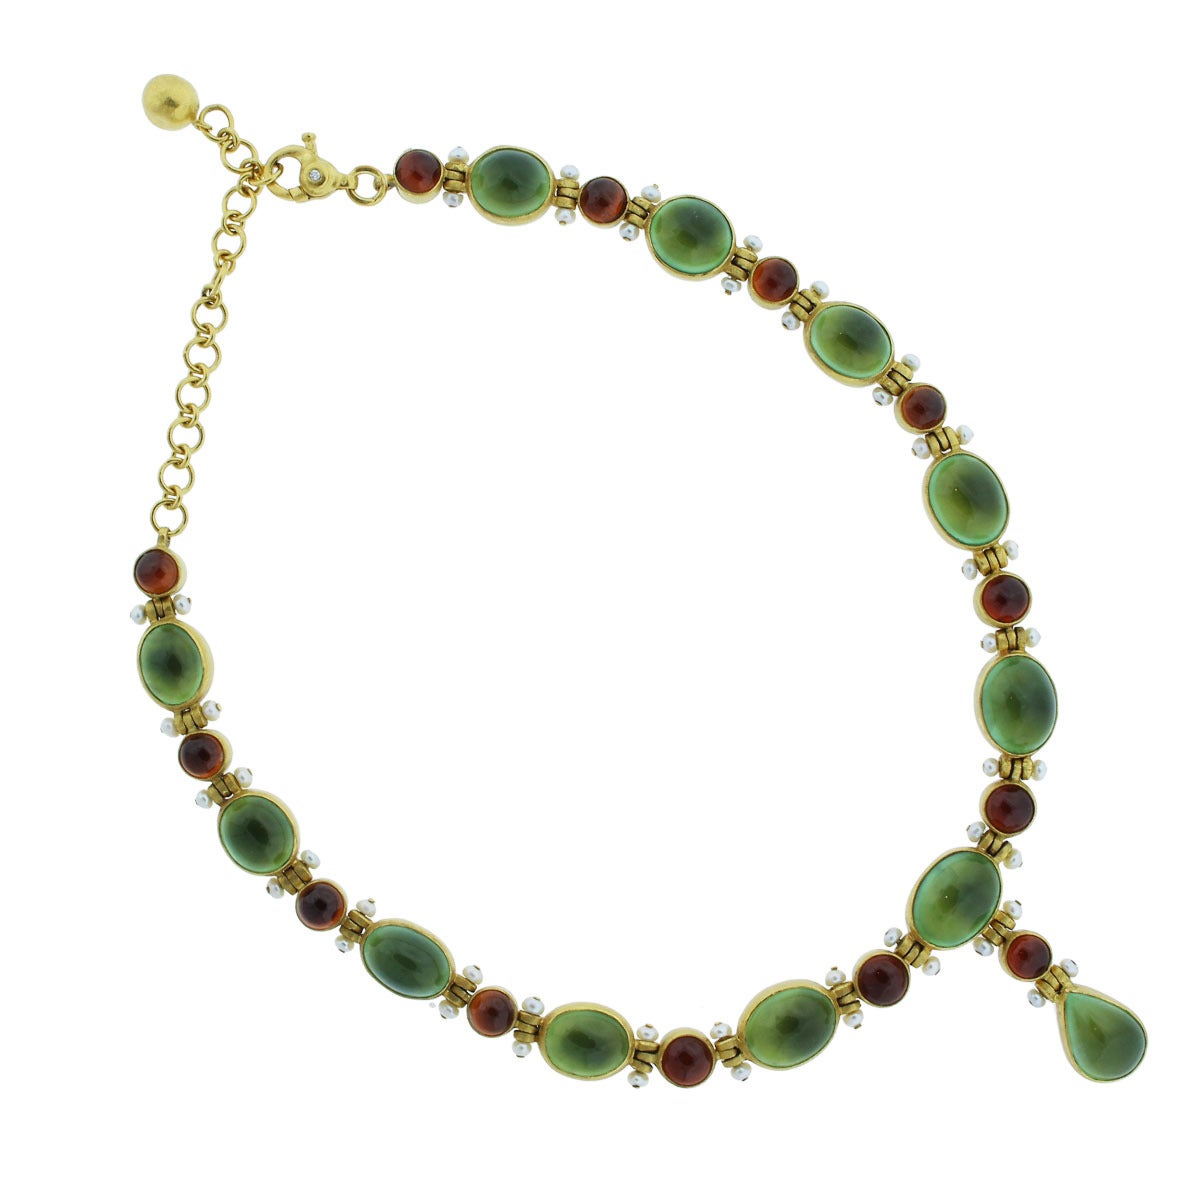 Style: Gold Multi Gemstone Bracelet & Necklace Set
Metal: 24k Yellow gold 
Gemstone Details: Cultured pearls measure approximately 3.5mm, 240.19ctw of Prenite stones & 63.02ctw of Hessonite stones
Necklace Size: 18